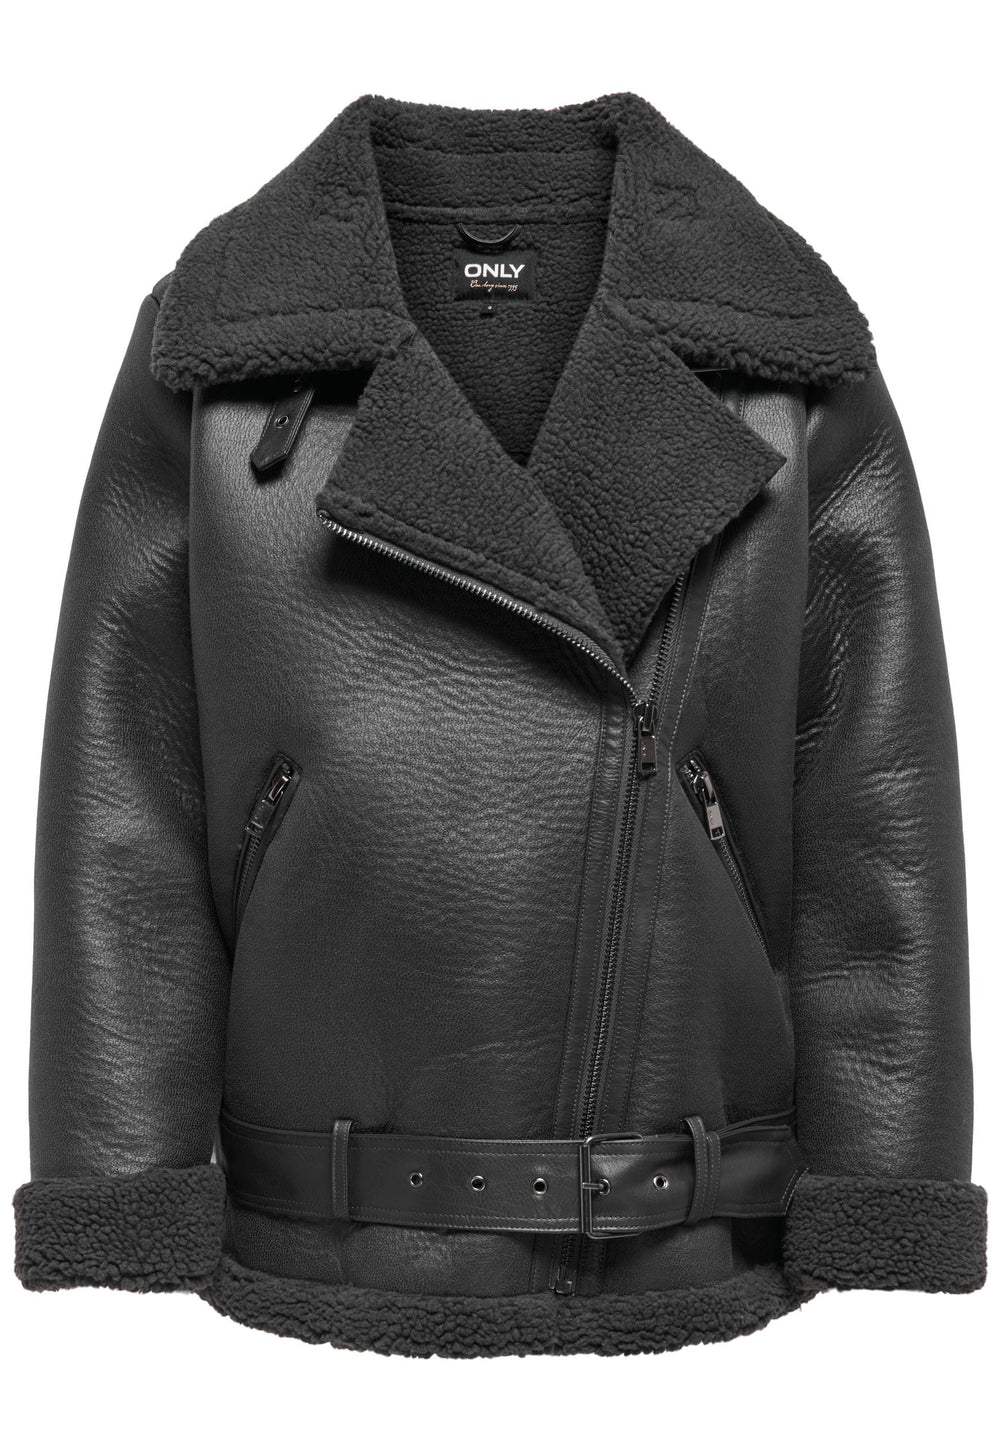 ONLY Lis Faux Leather & Shearling Aviator Jacket in Washed Black - One Nation Clothing